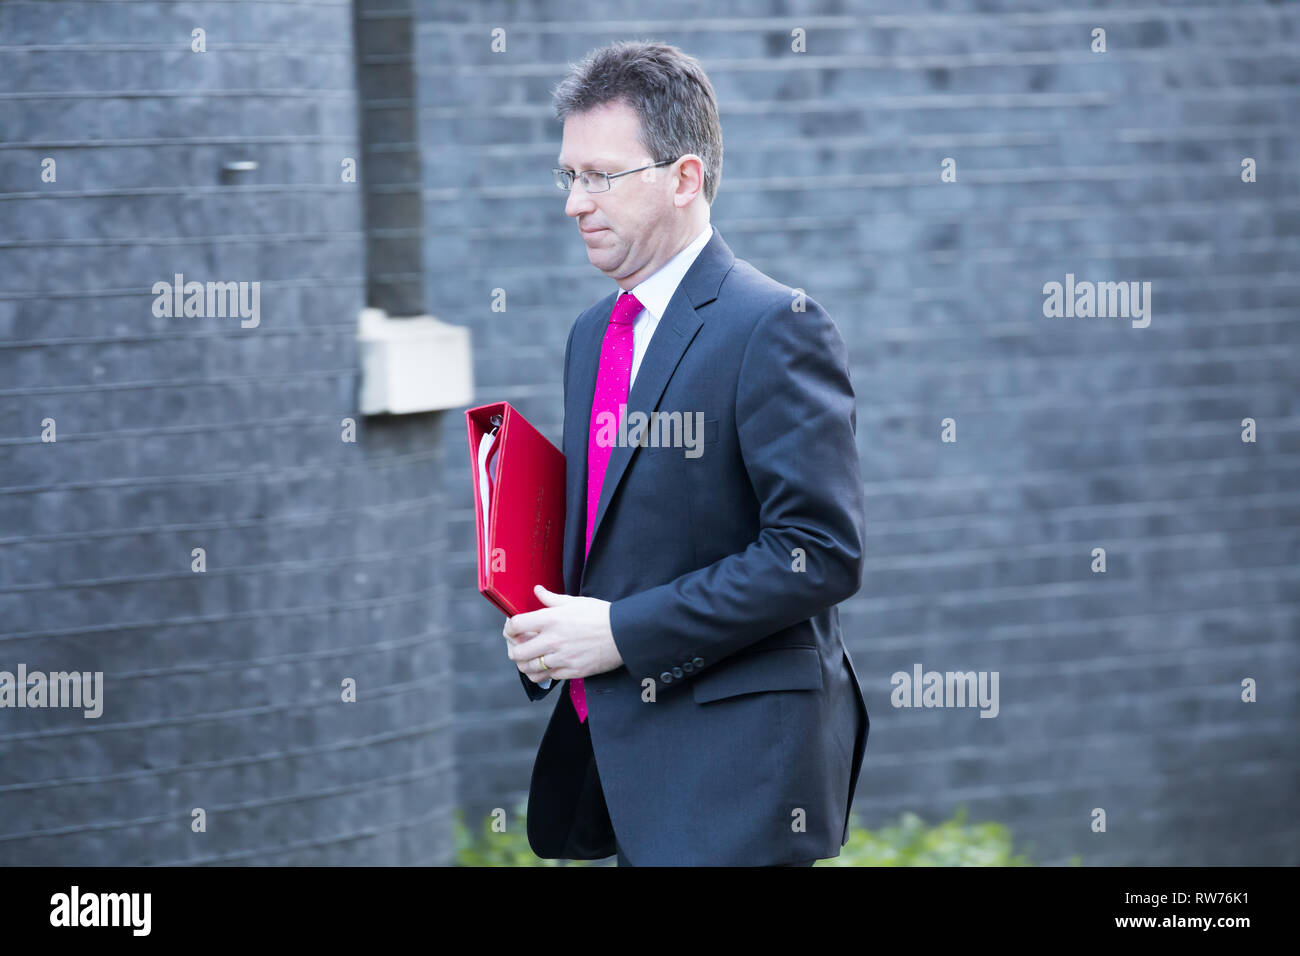 London, UK. 5th Mar, 2019.Secretary of State for Digital, Culture, Media and Sport The Rt Hon Jeremy Wright MP arrives for the weekly cabinet meeting at 10 Downing Street in London. Credit: Keith Larby/Alamy Live News Stock Photo